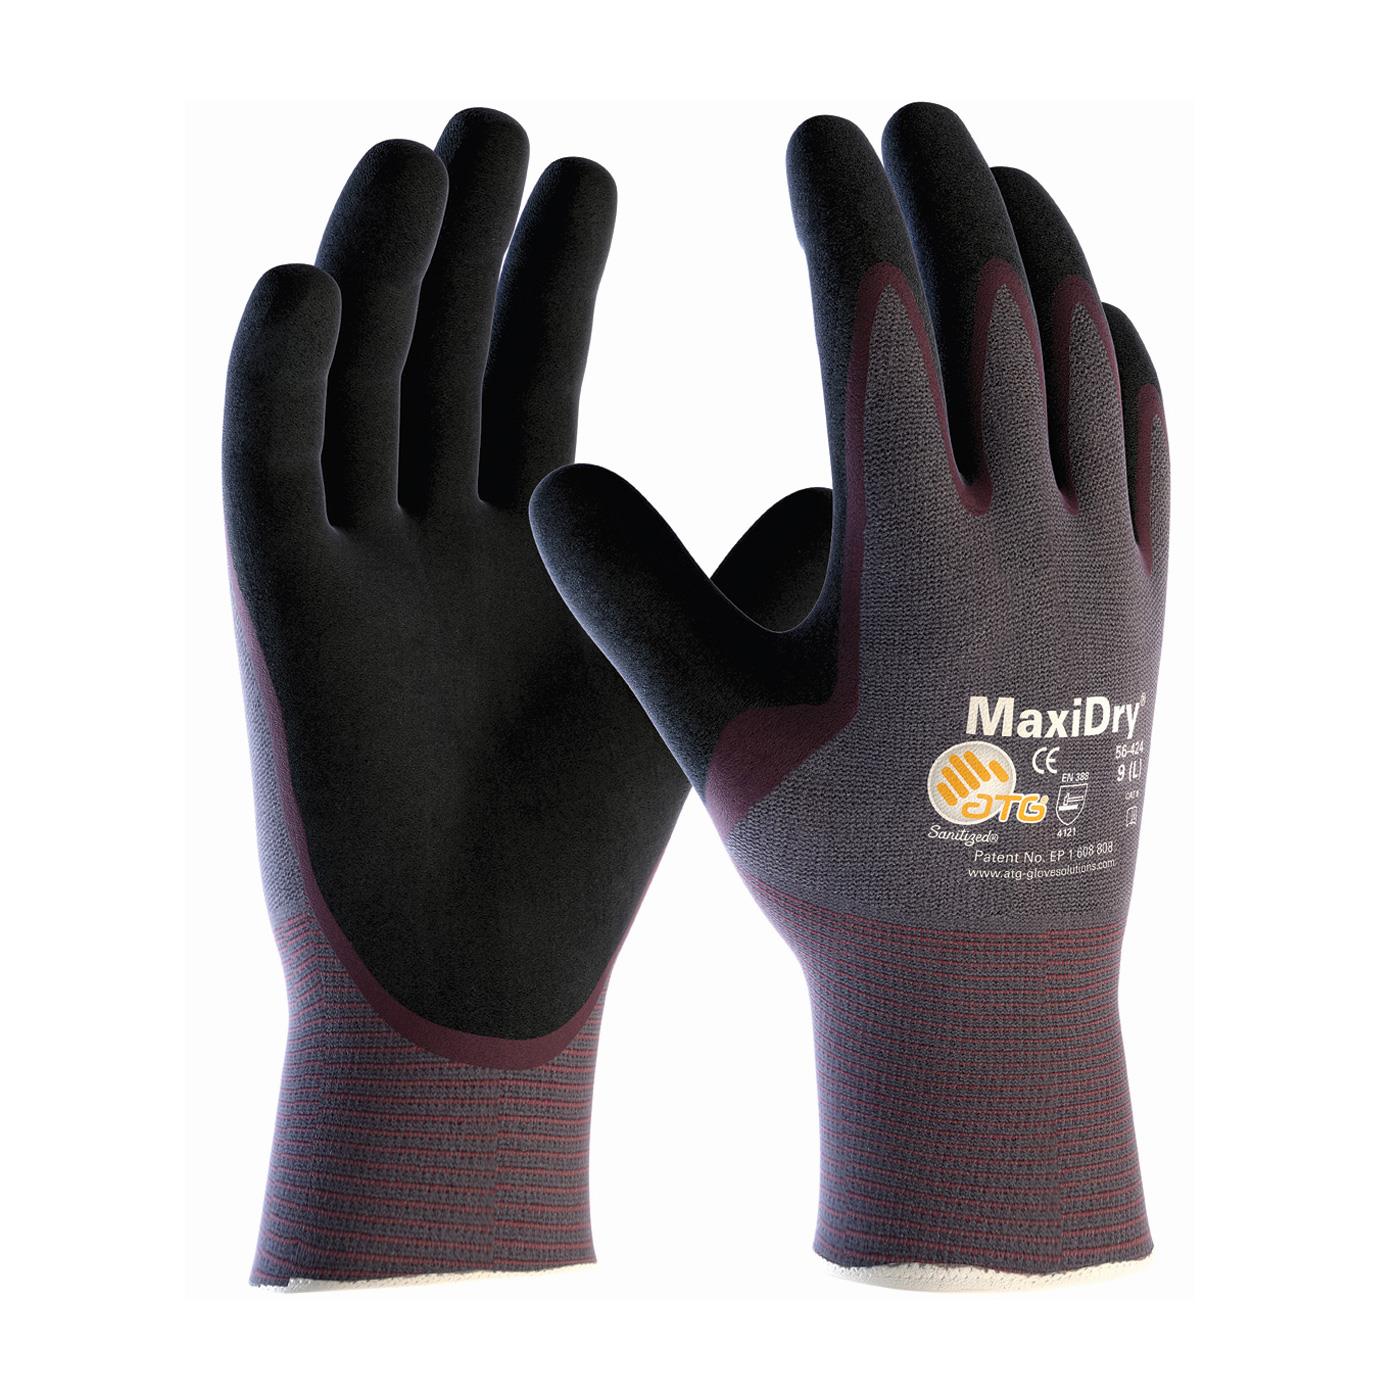 MAXIDRY GRIPTECH NITRILE PALM COAT - Tagged Gloves